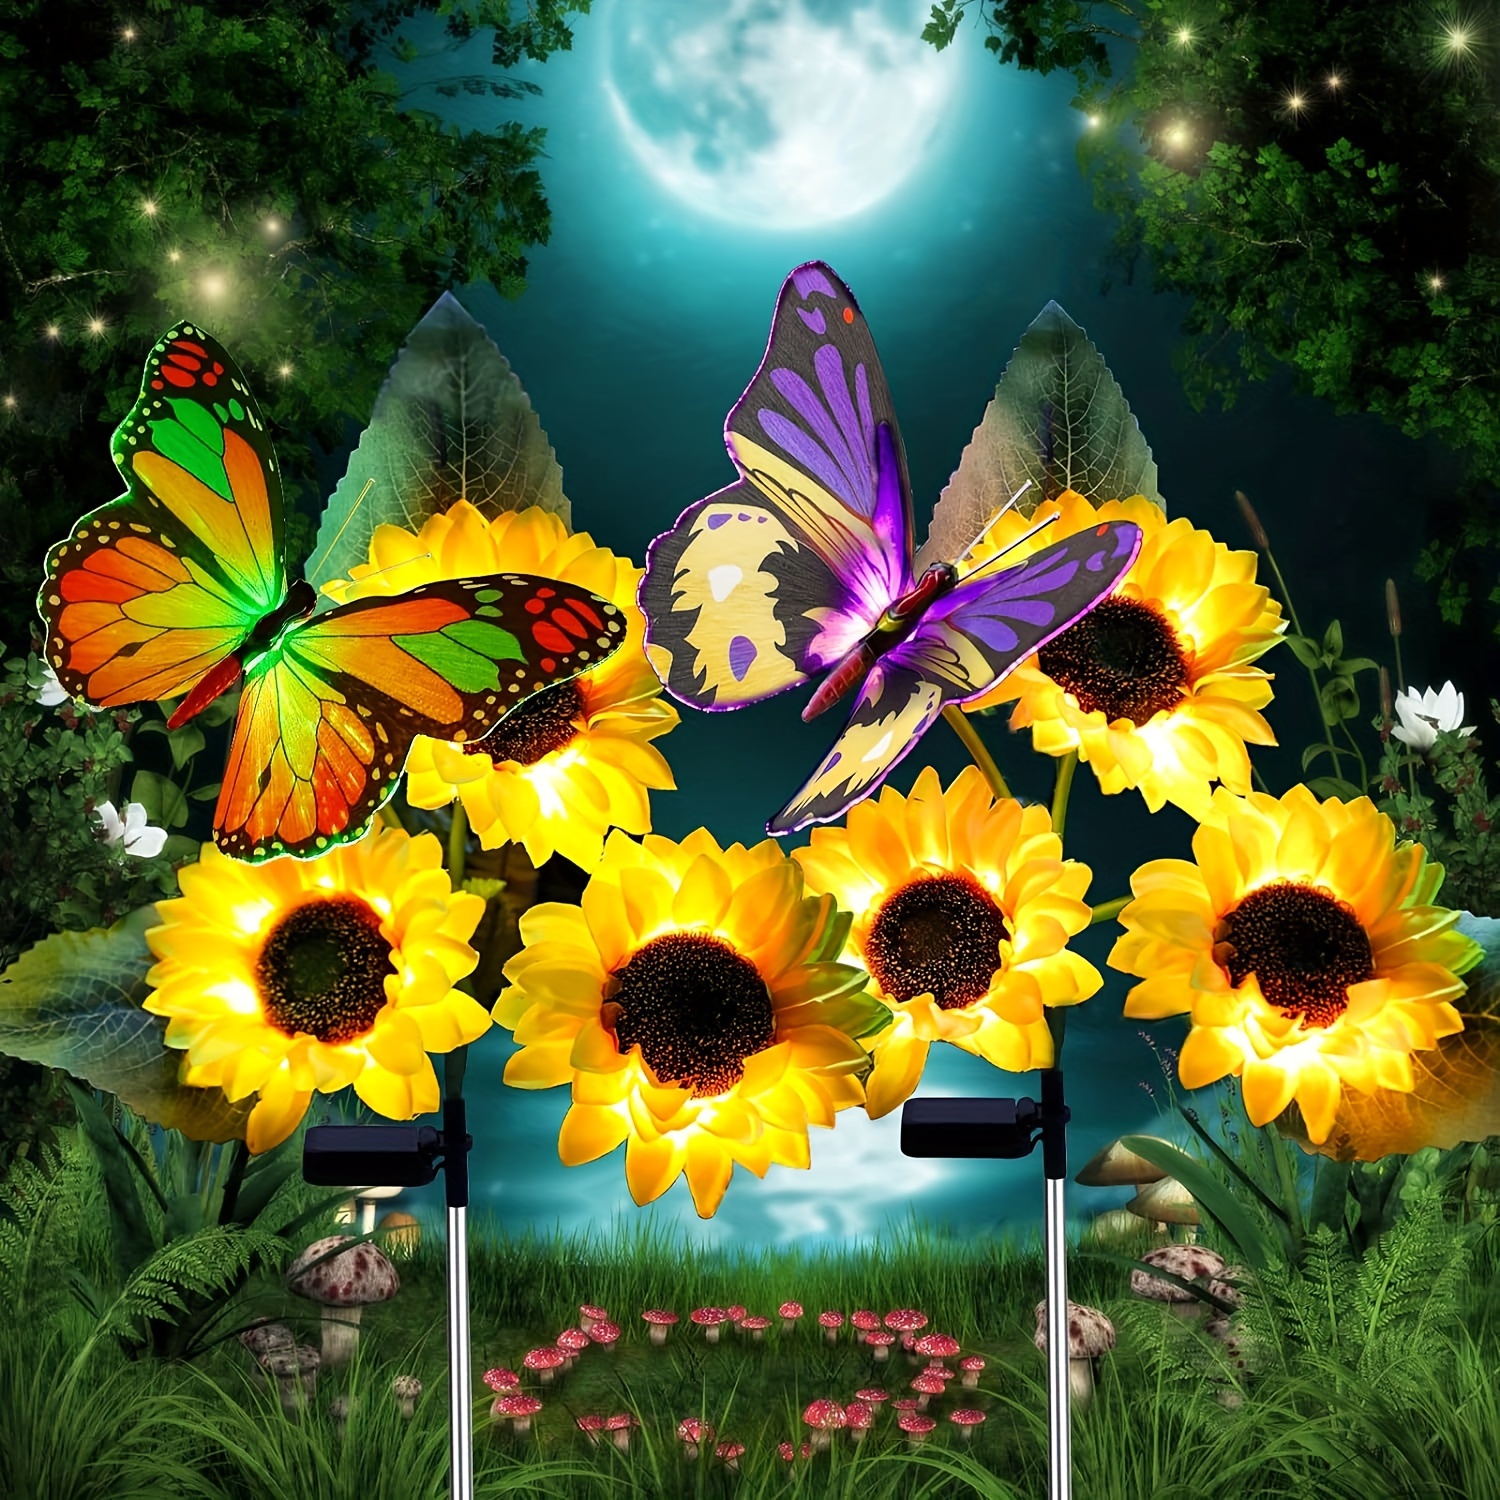 

Solar Sunflower Lights Outdoor Garden Lights, Solar Flower Lights With Butterfly Waterproof Garden Decor, Gifts For Mom Grandma, Sunflower Stake Led Lights For Yard Patio Lawn Pathway Outside